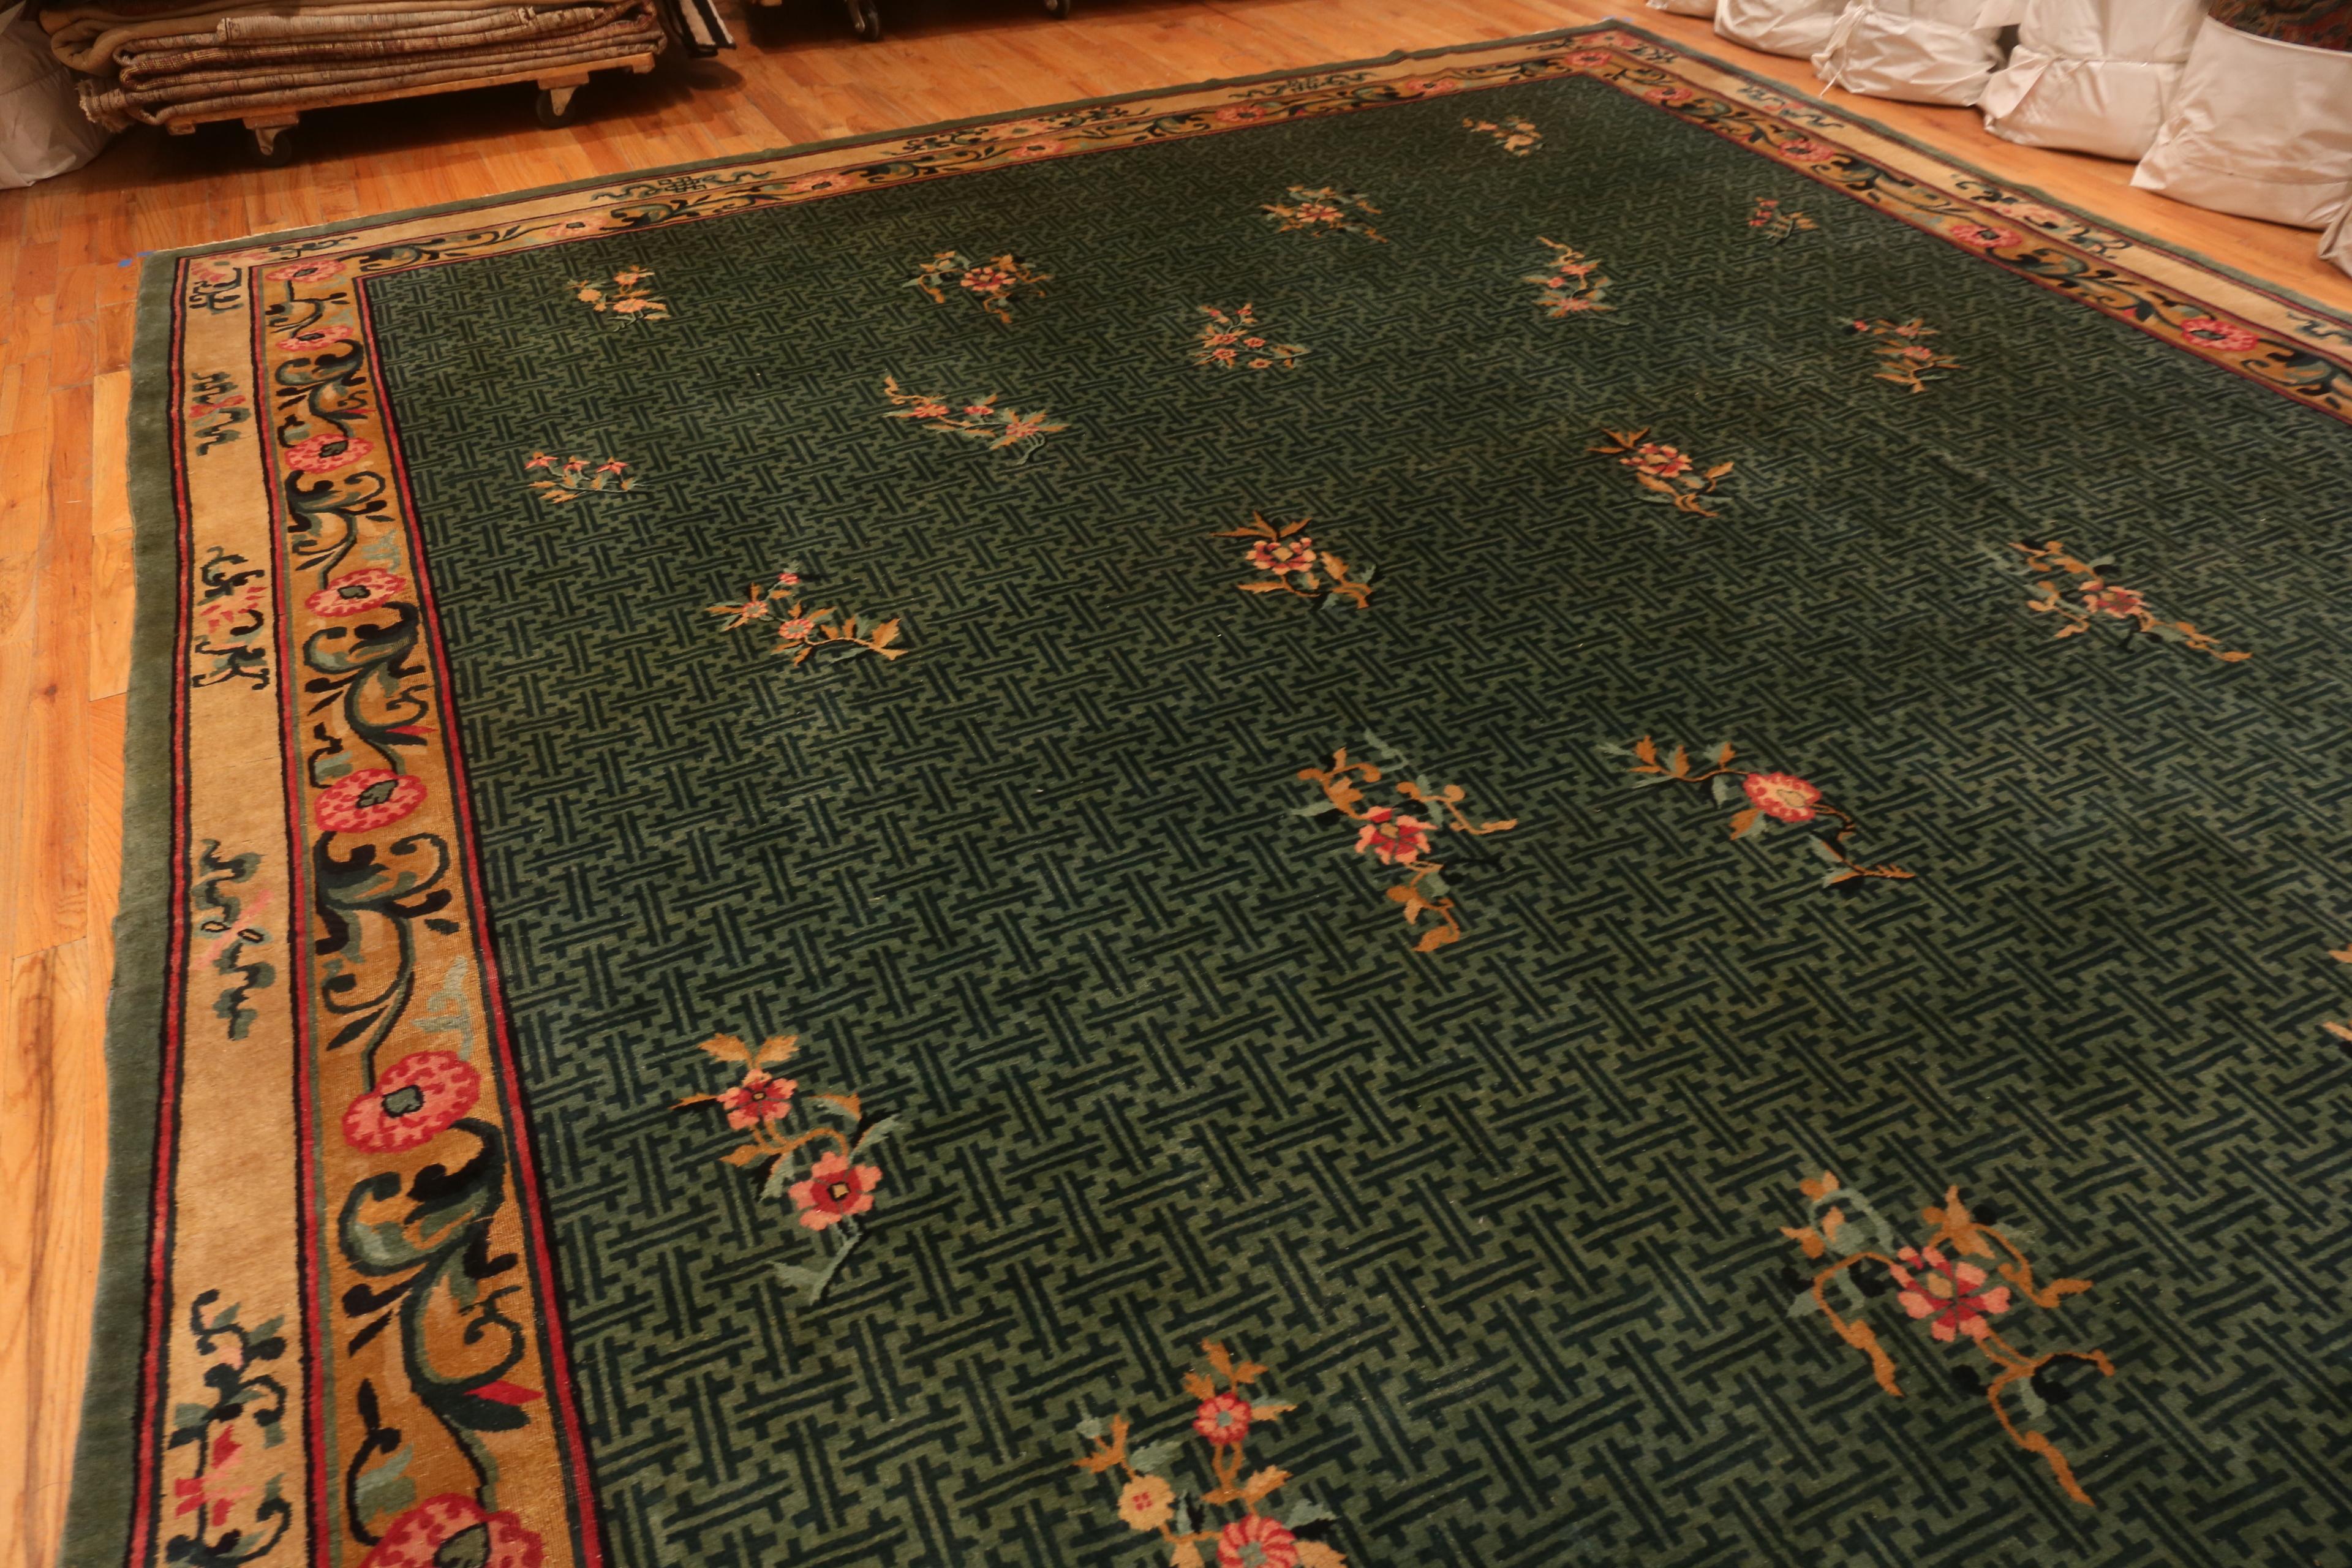 A breathtaking Oversized Green Background Antique Chinese Rug, country of origin / rug type: Chinese rug, Circa date: 1920. Size: 14 ft x 21 ft 6 in (4.27 m x 6.55 m)